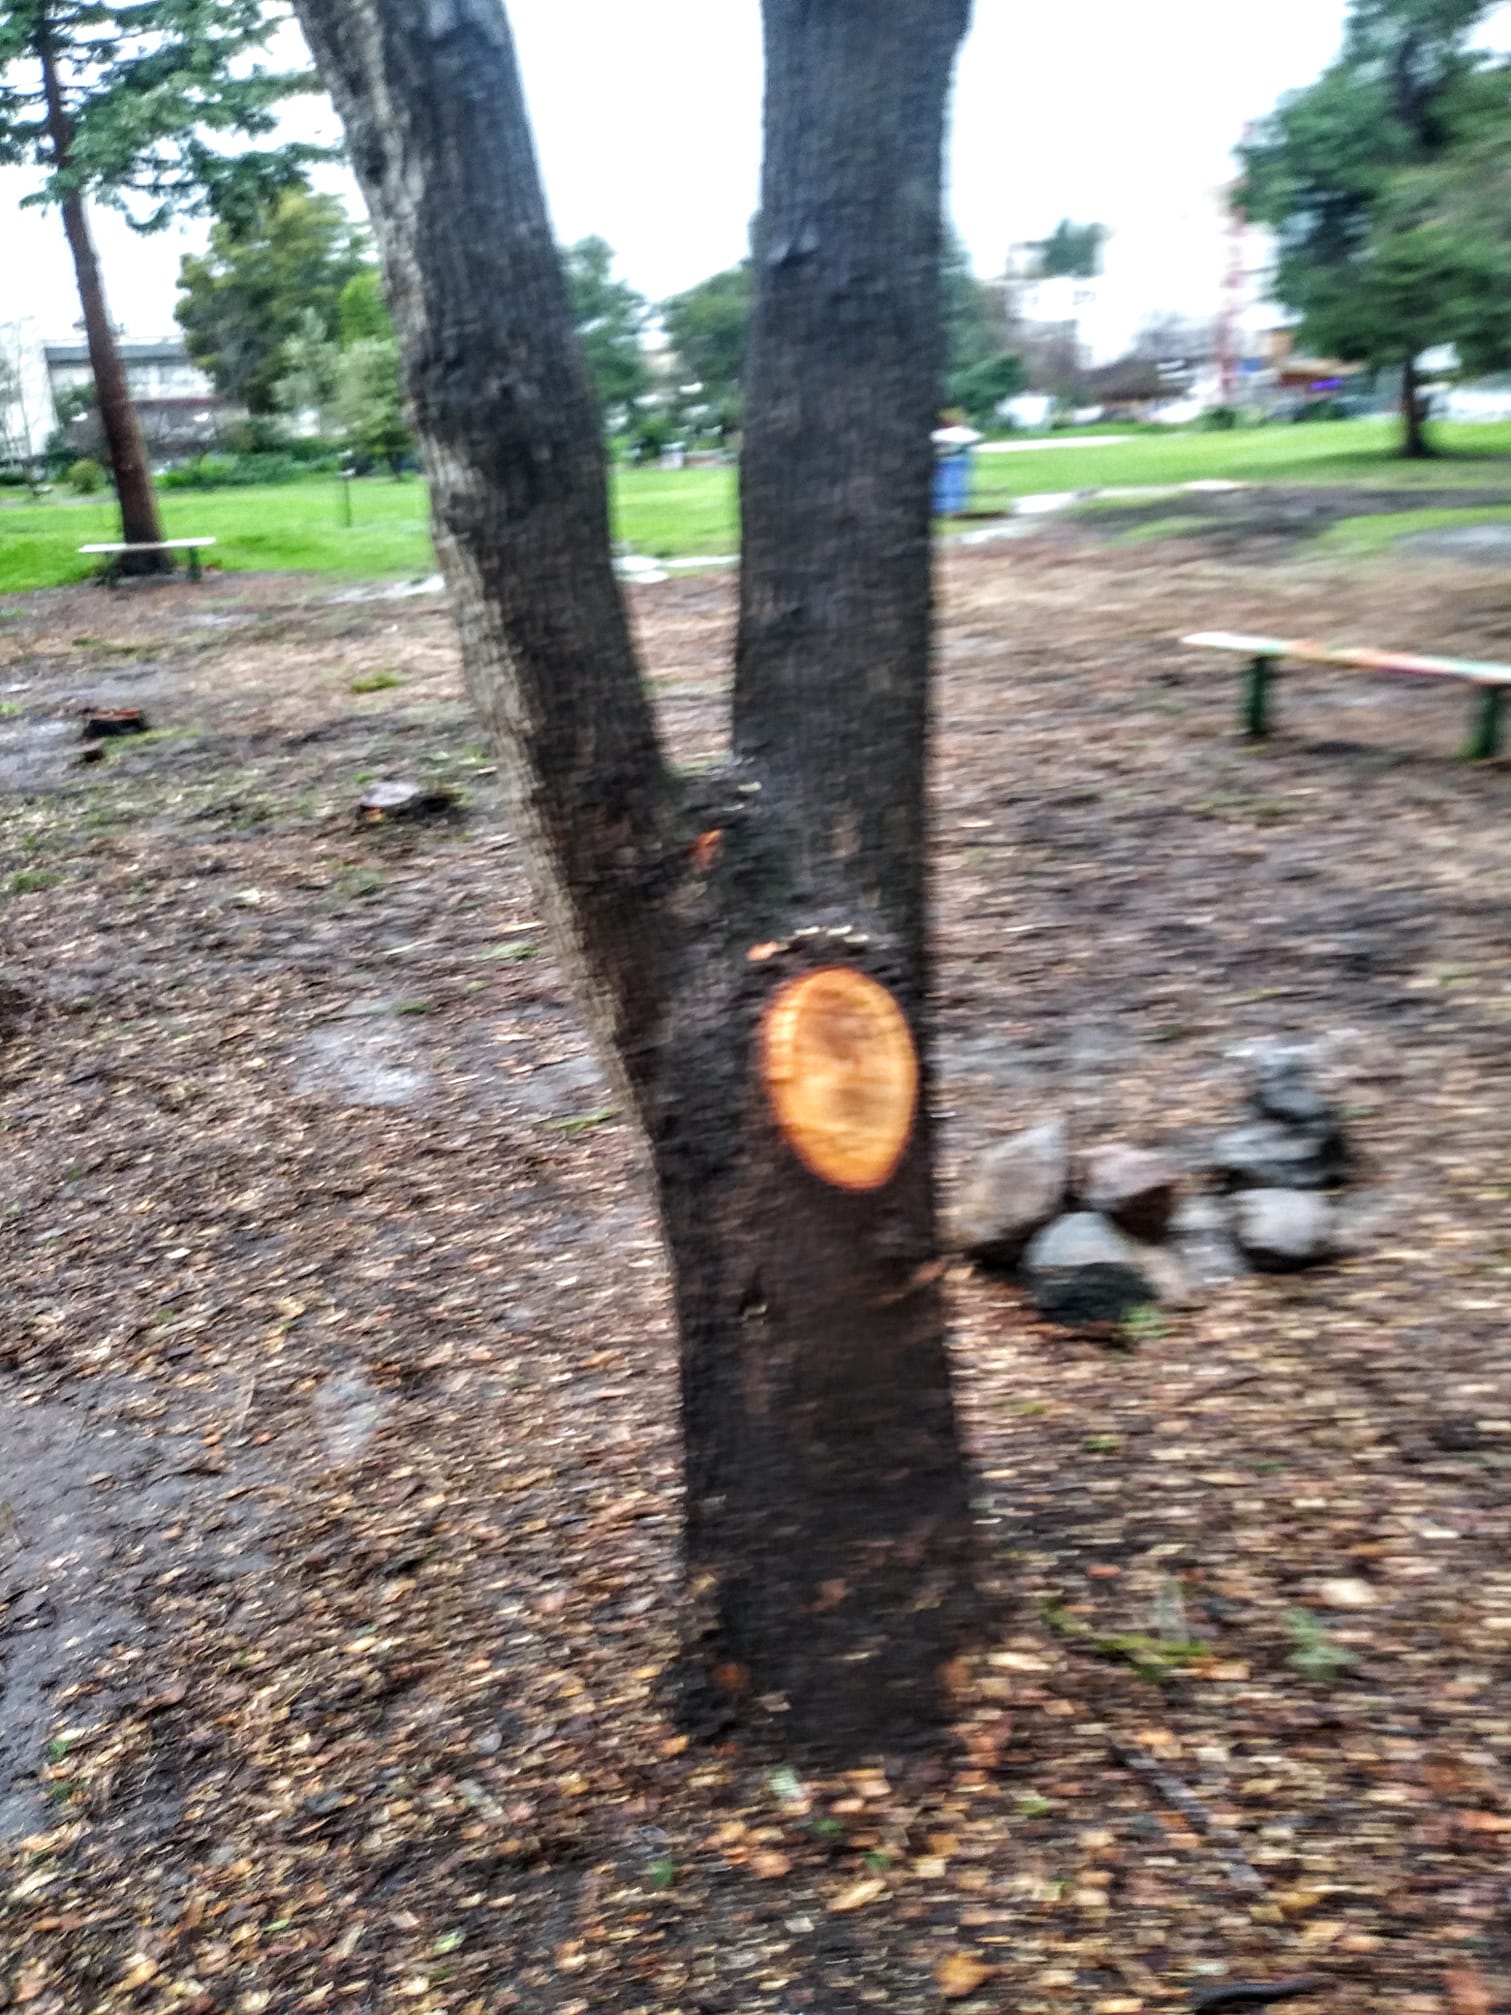 blurry pic of a tree in a park